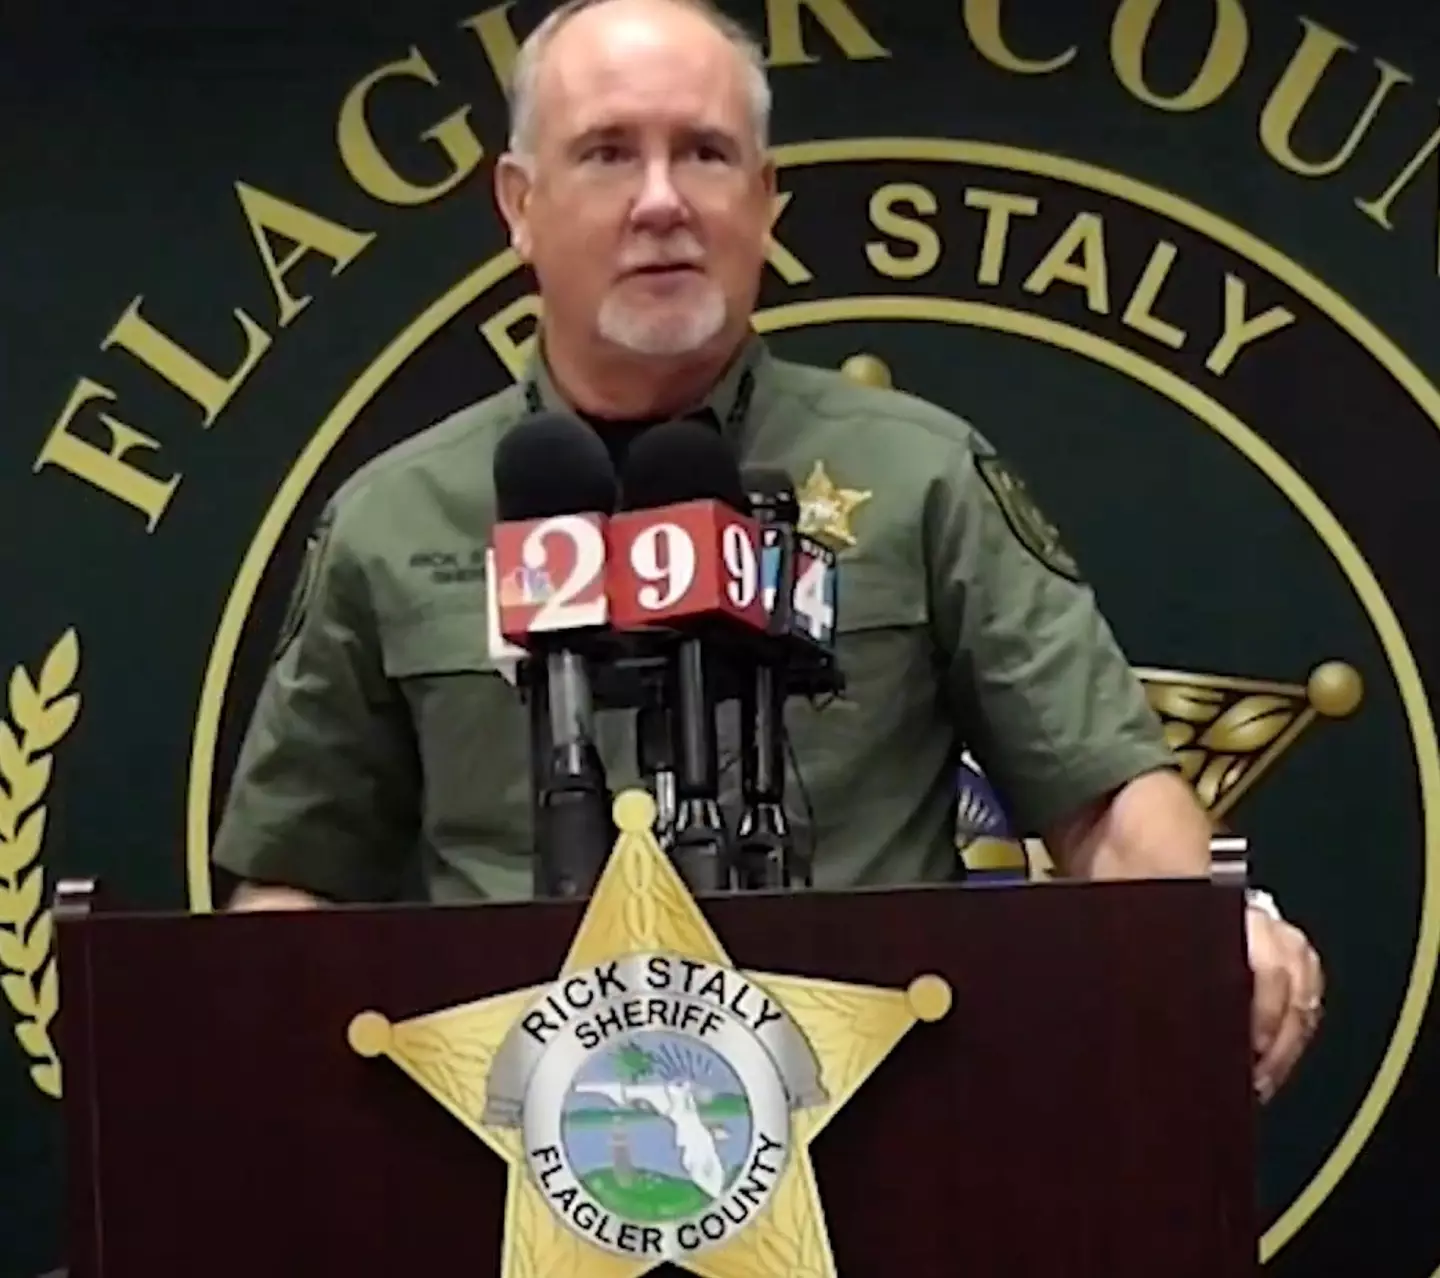 Sheriff Staly revealed police had confiscated over $5m of drugs during the operation.